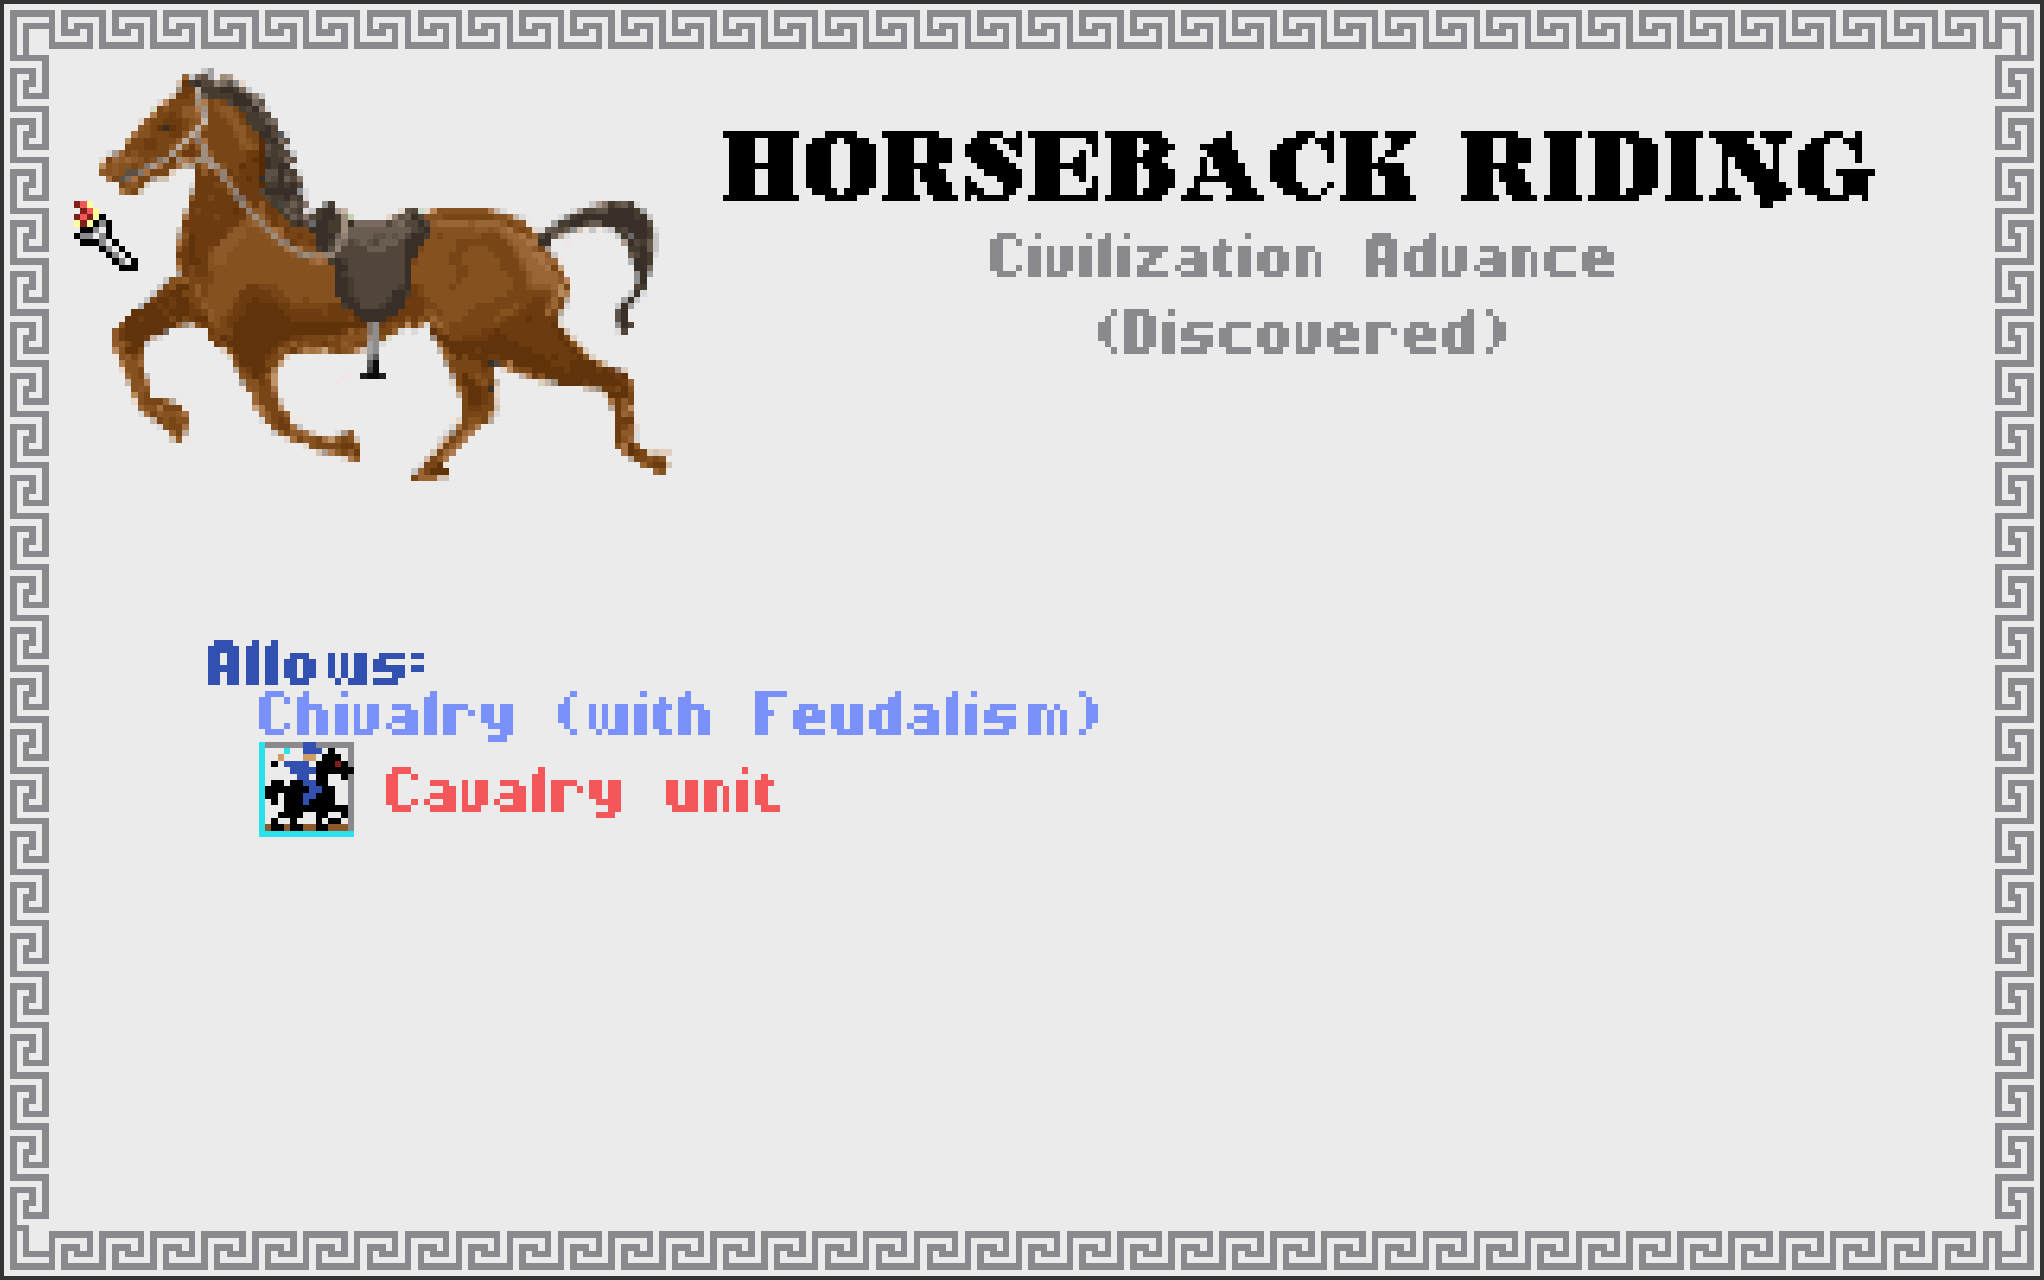 Another image of the the horseback riding technology from the game Civilization.